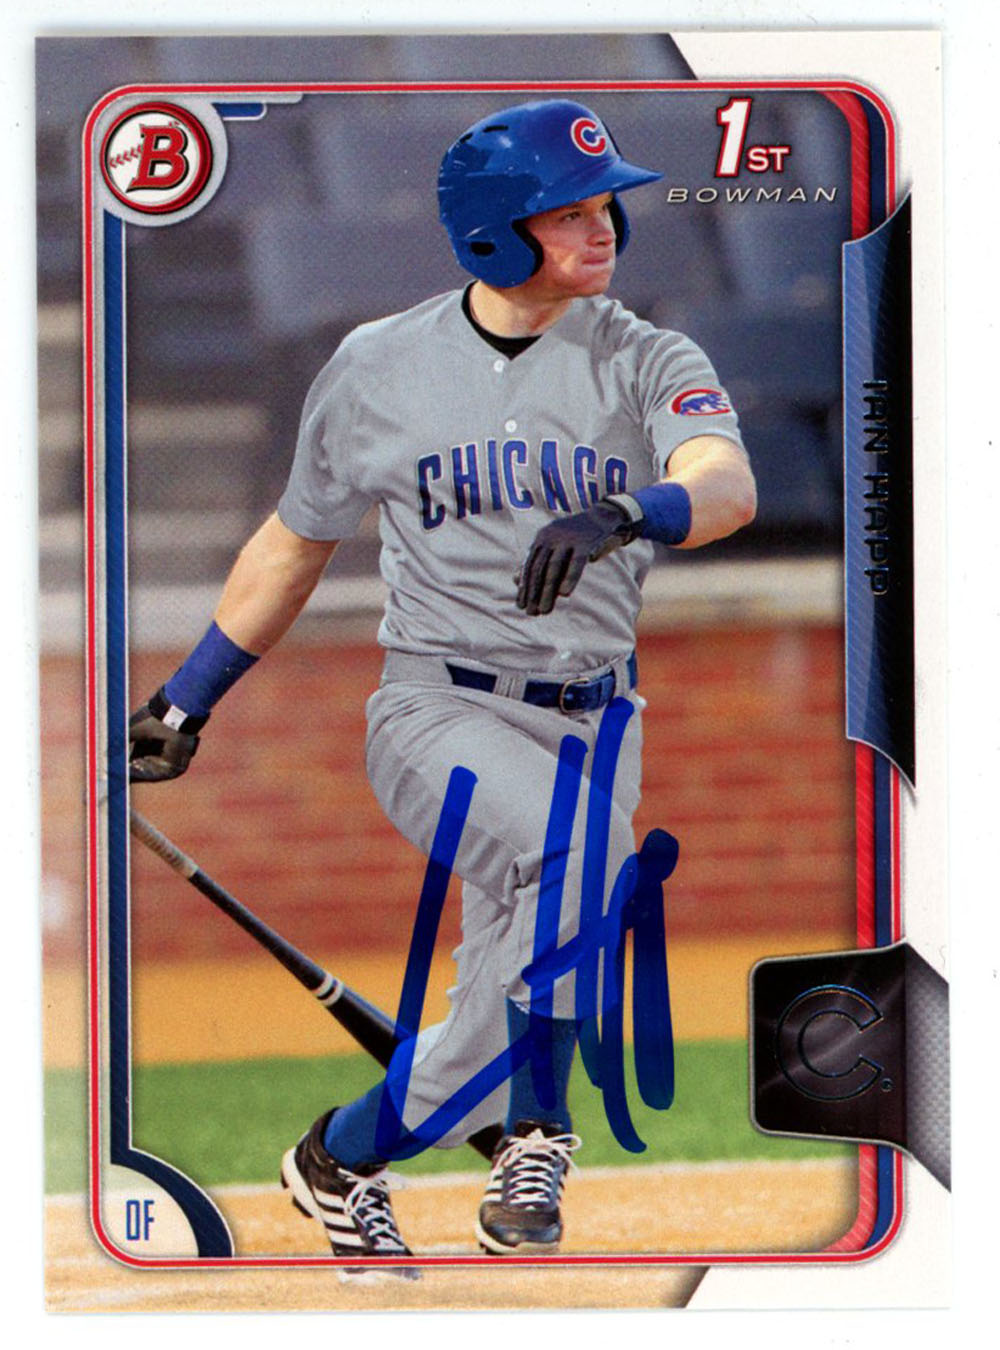 Ian Happ Signed 2015 Bowman Rookie Card #28 Chicago Cubs